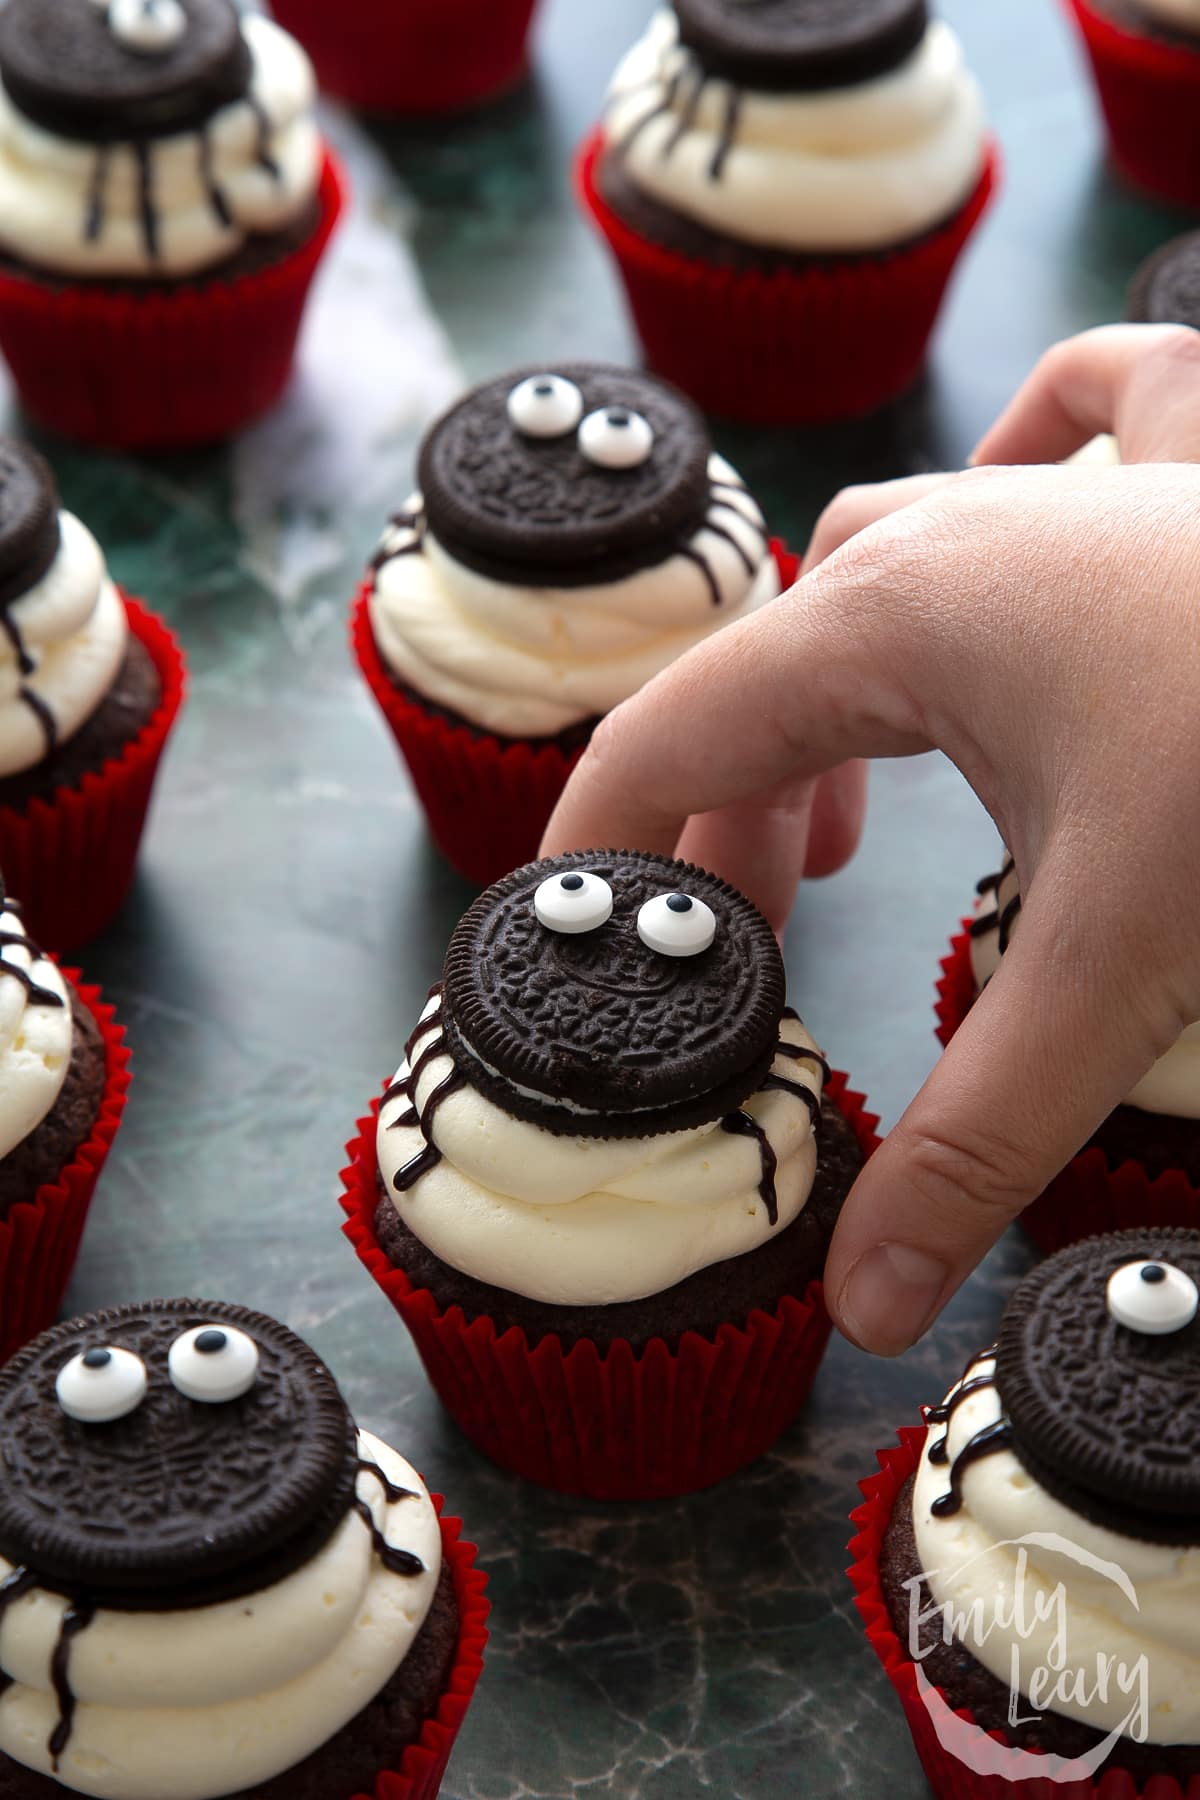 Vegan Halloween cupcakes, decorated with Oreos and candy eyes to look like spiders. A hand reaches to take one.